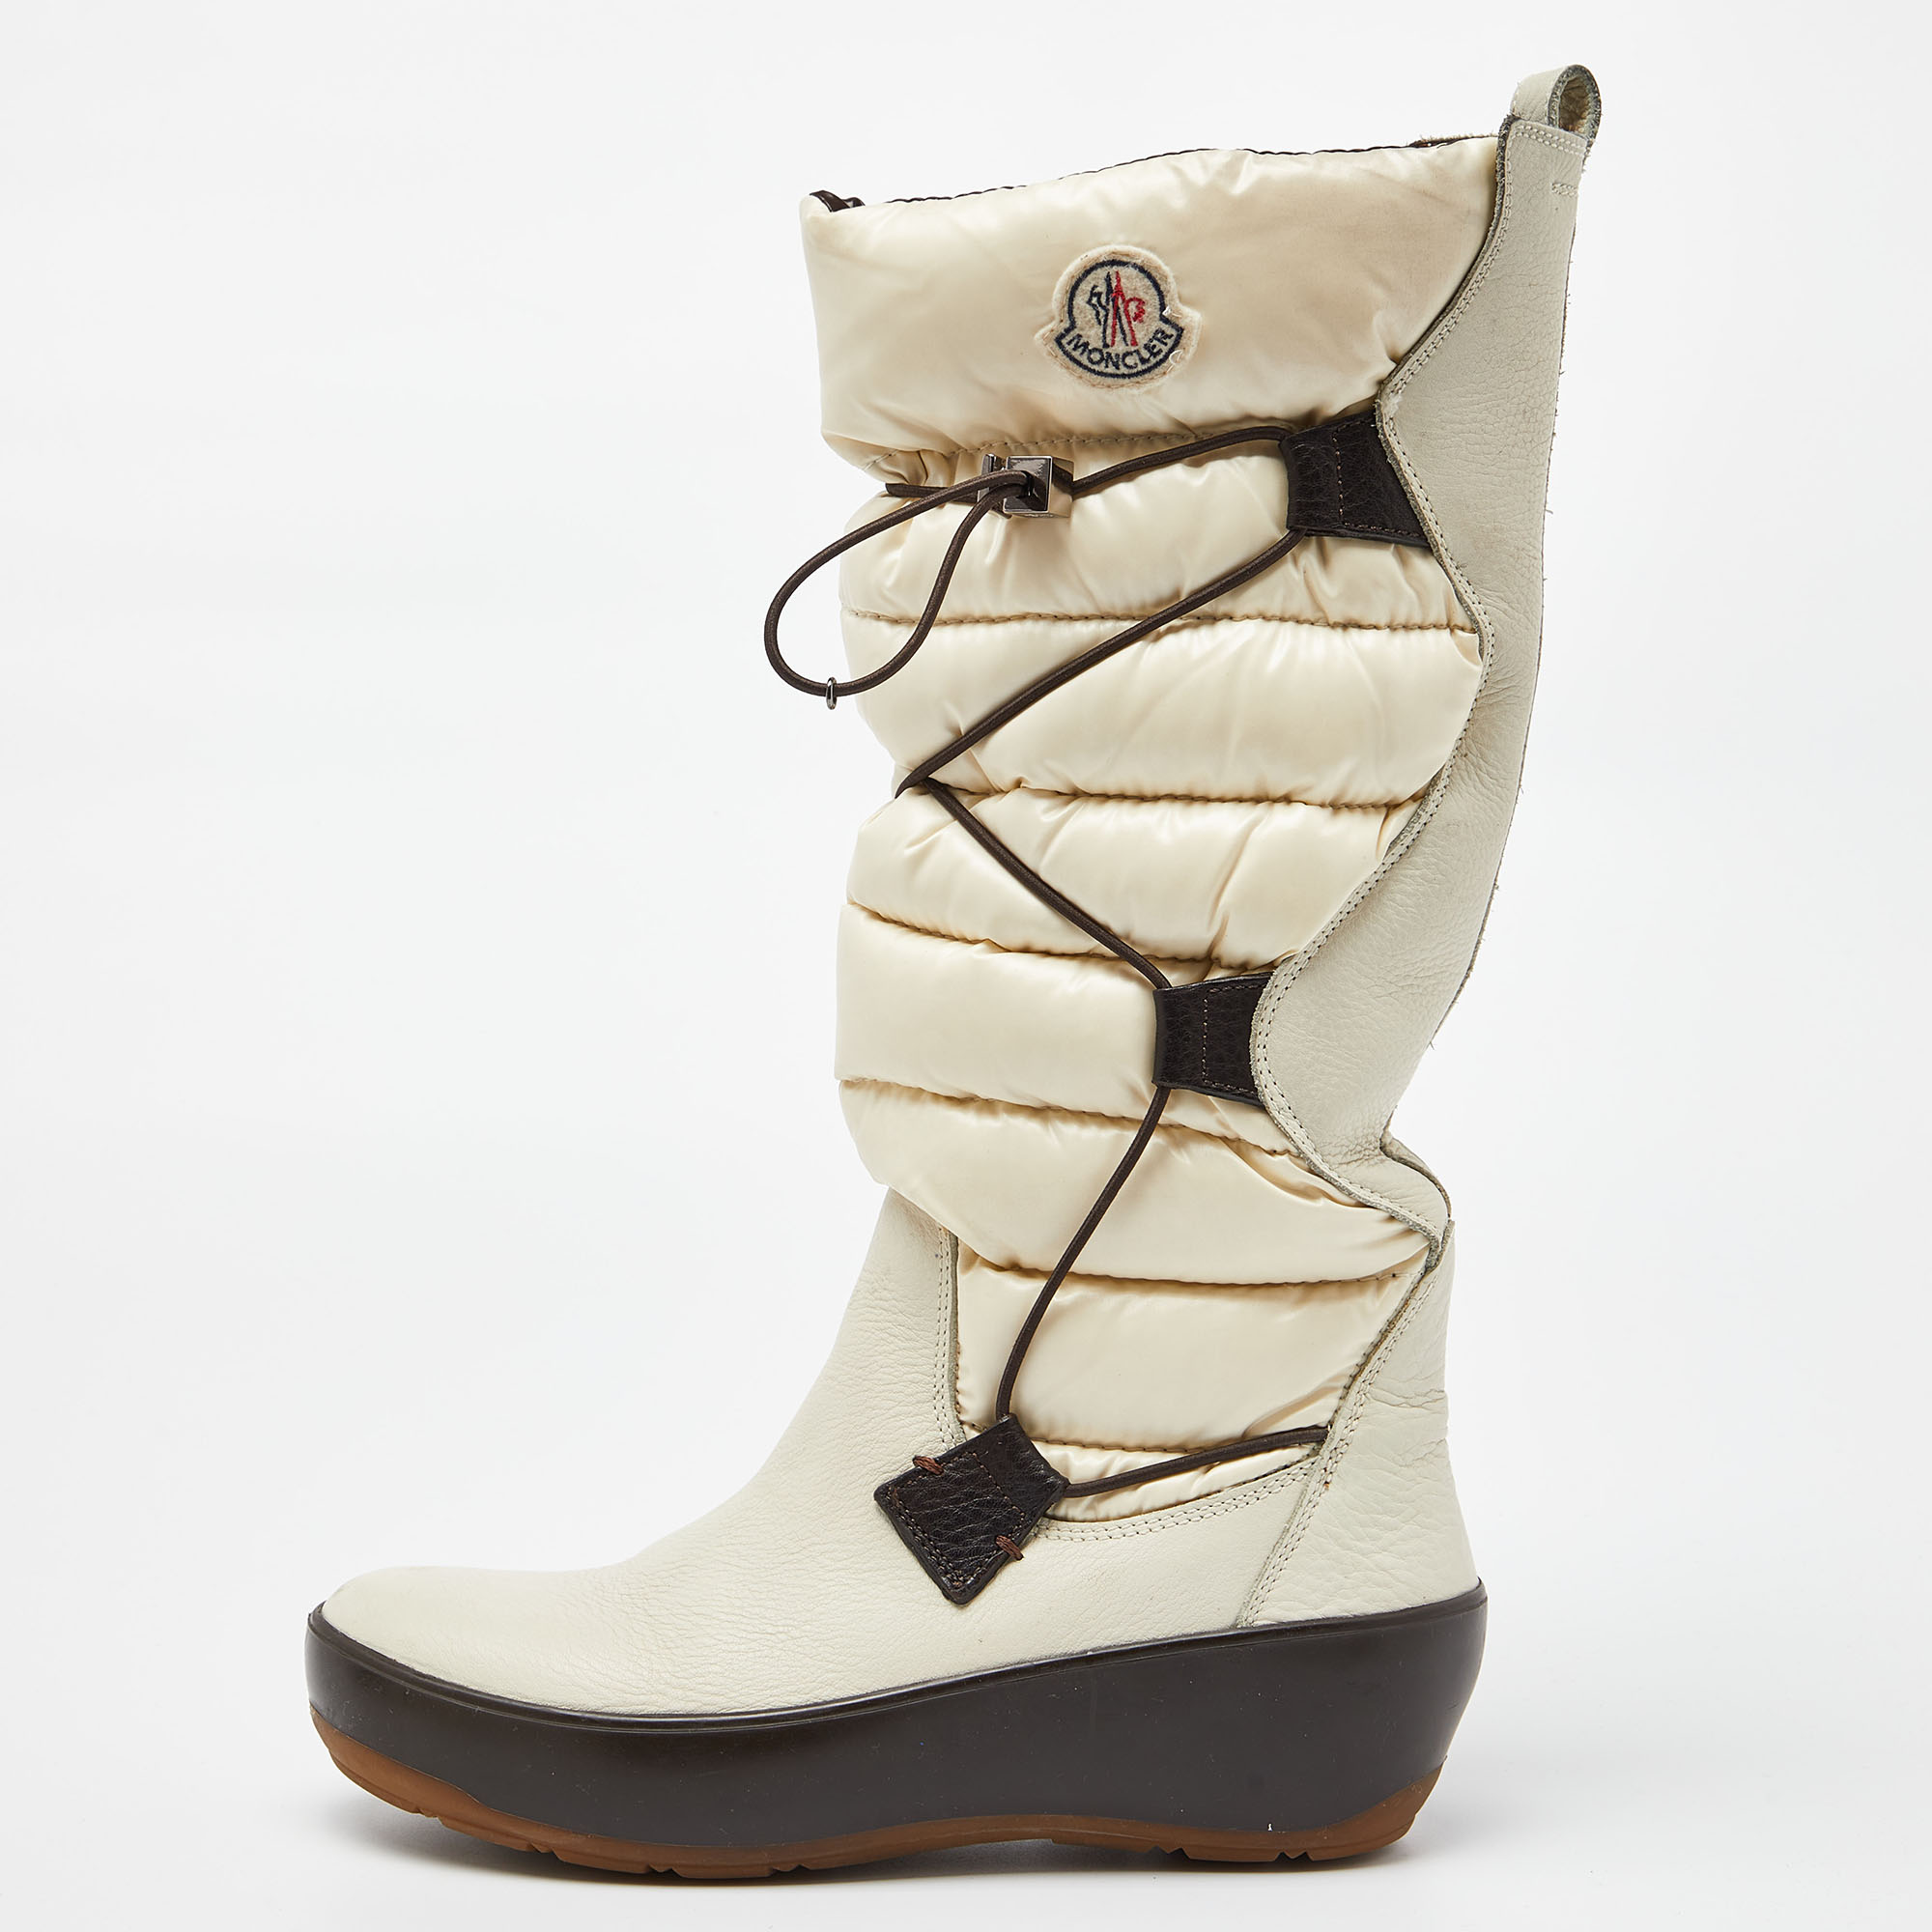 Moncler off white satin and leather snow boots size 39